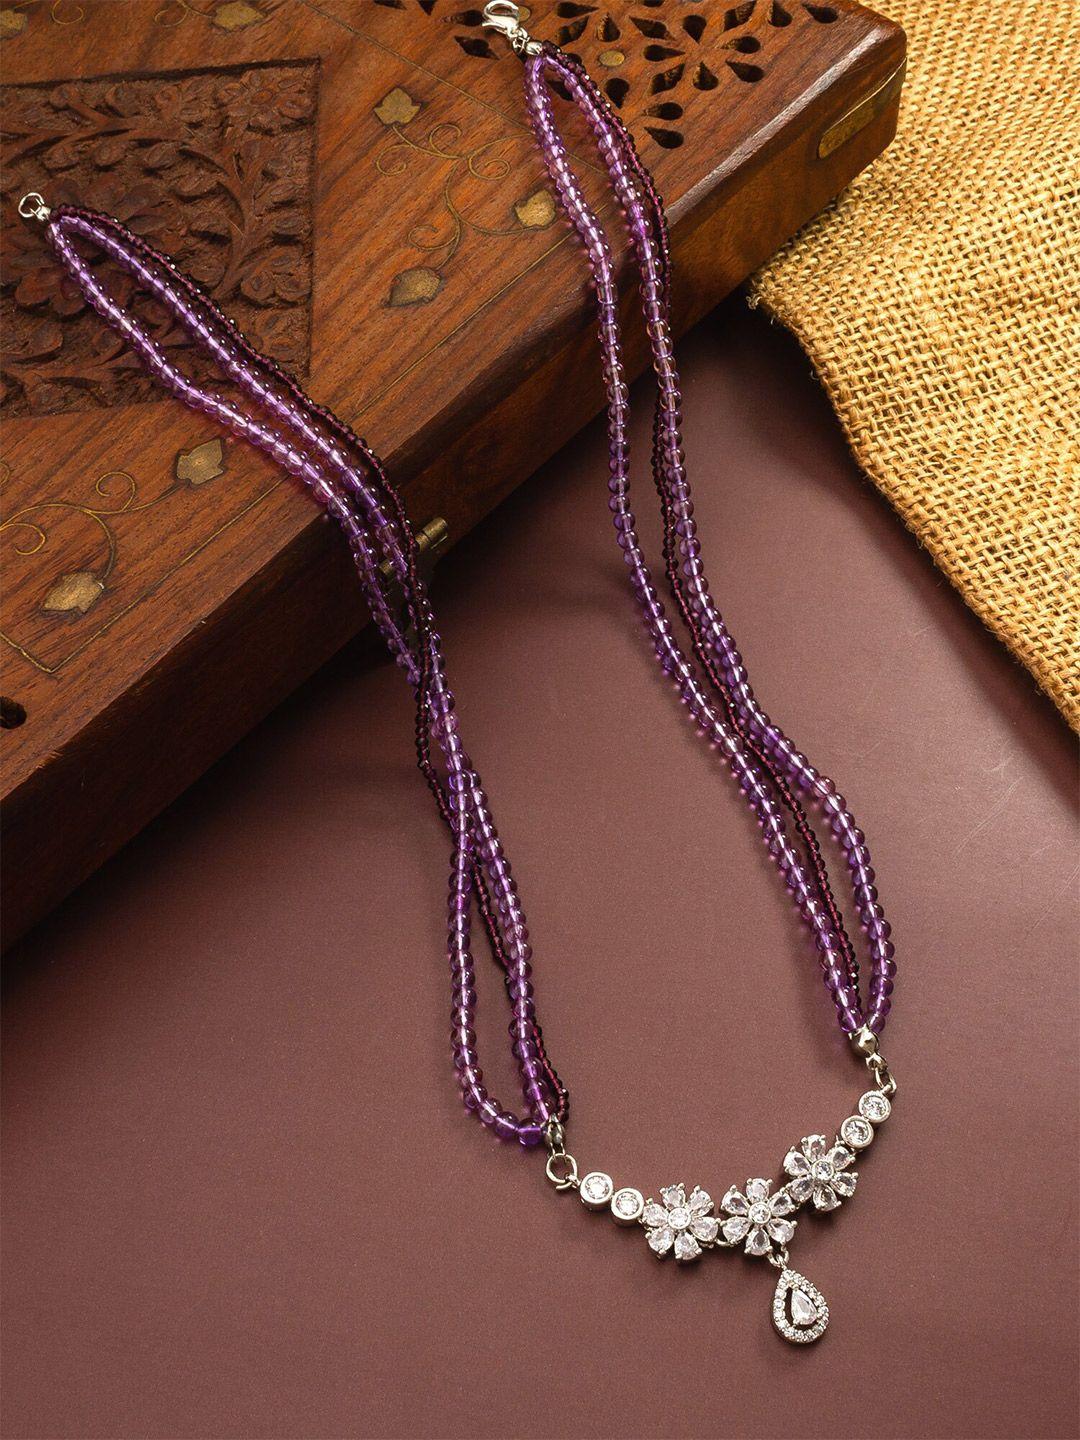 aadita silver-toned silver handcrafted necklace